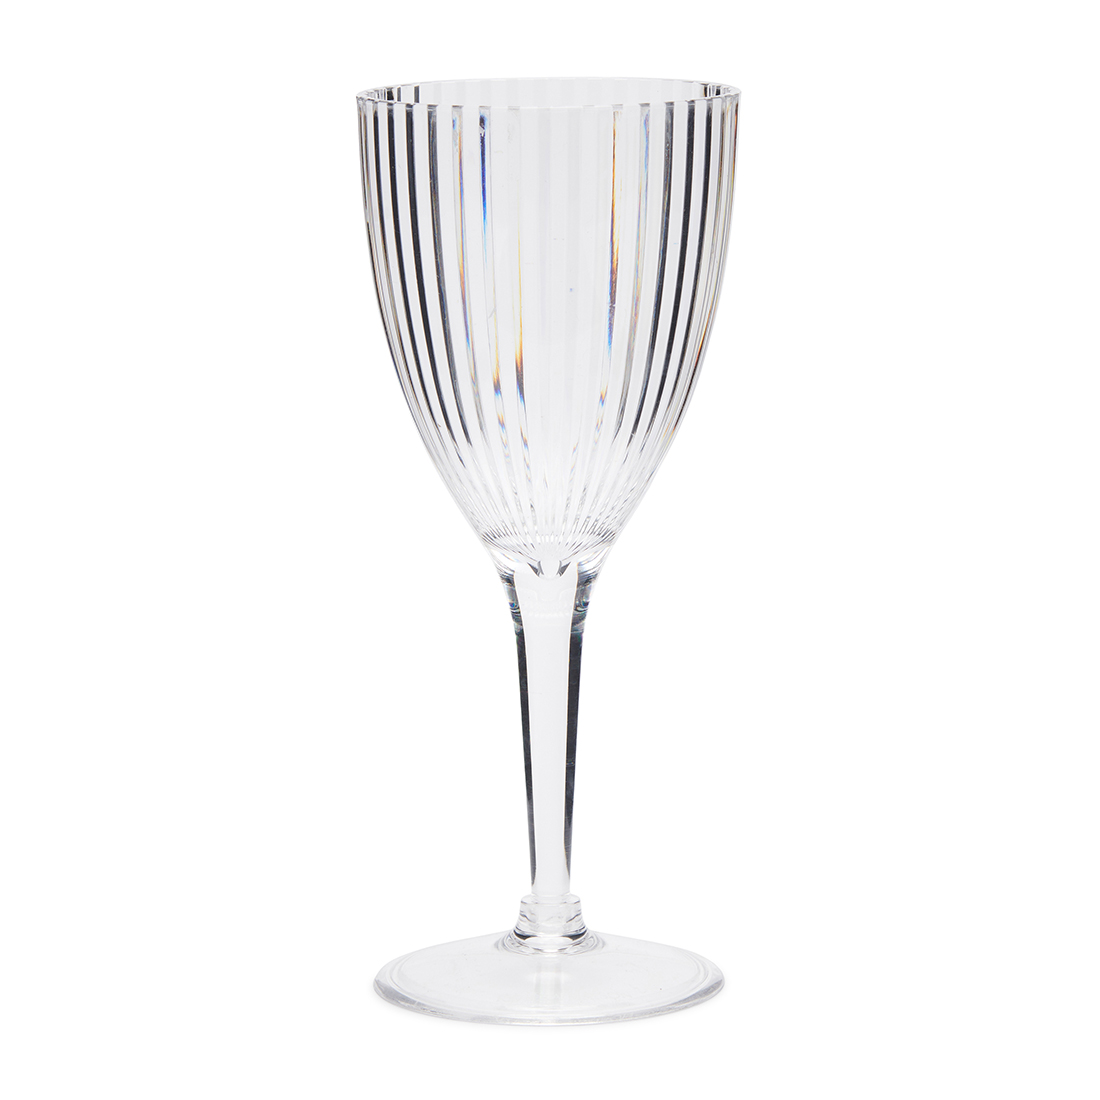 Riviera Maison RM Live For Summer Wine Glass - Ms - 9.0x9.0x21.0 cm